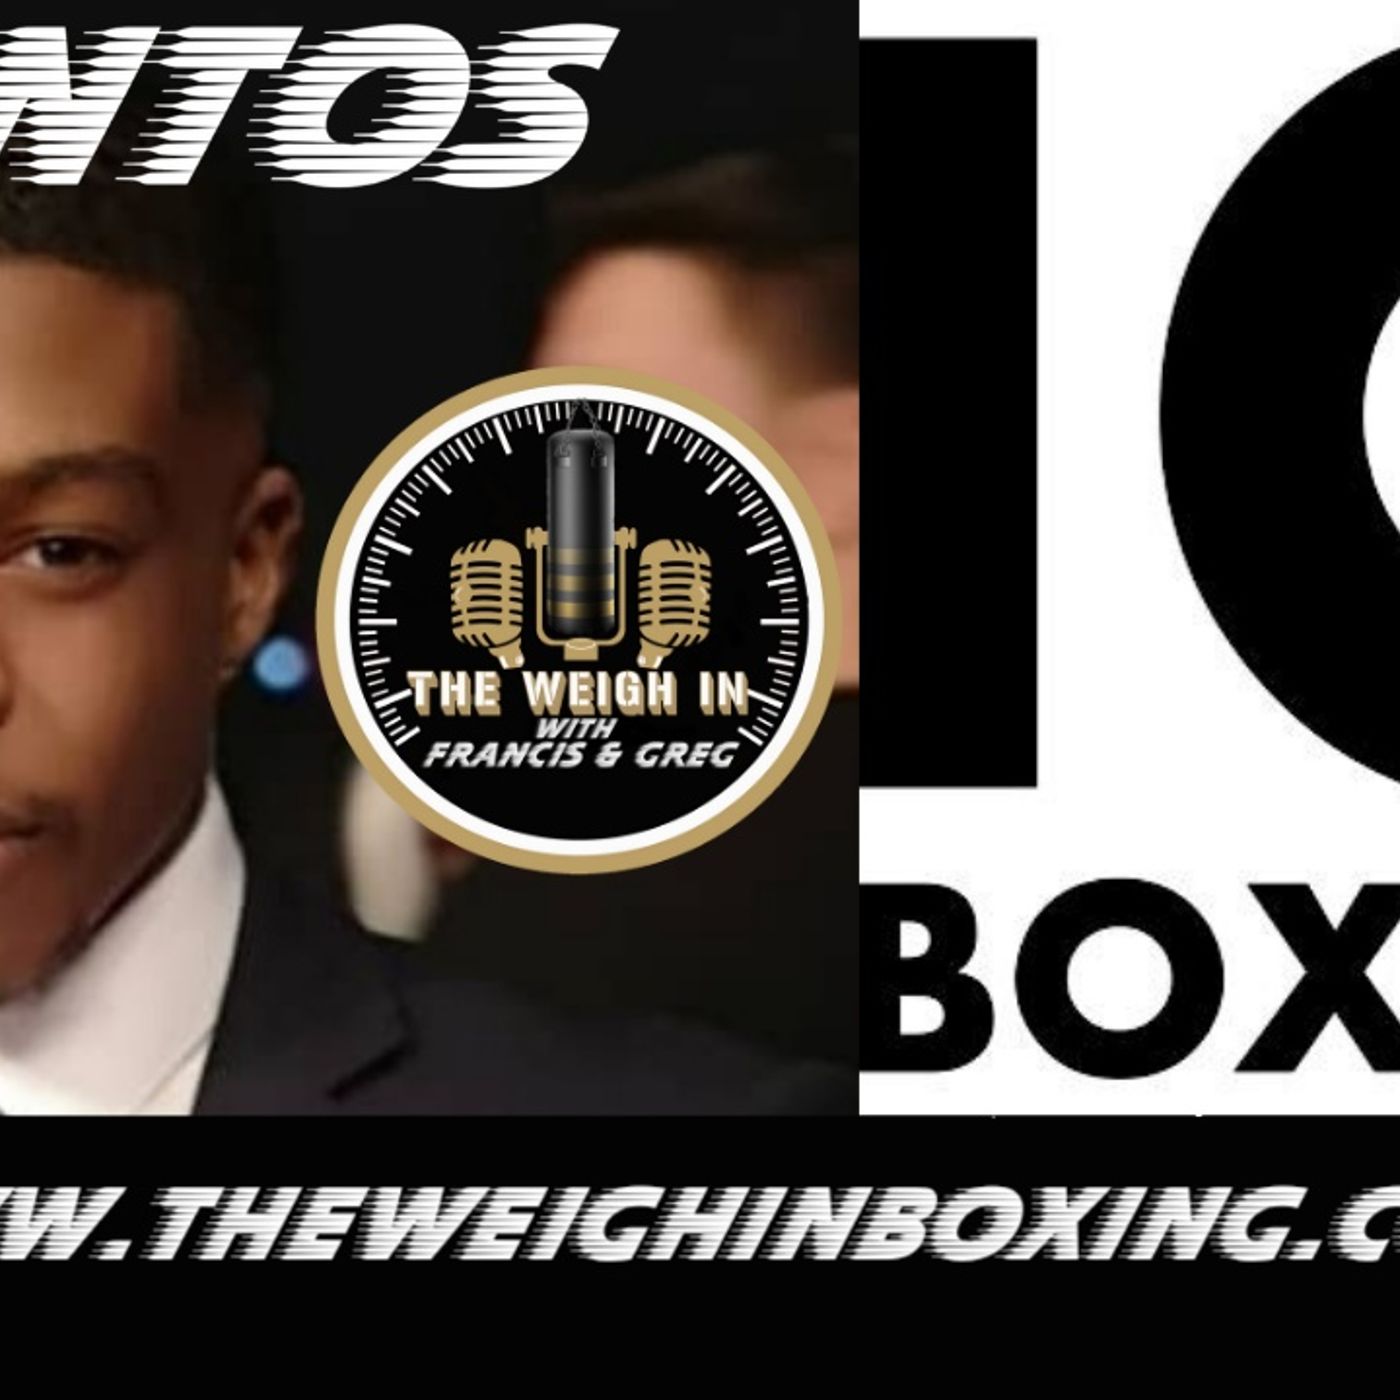 Santos Co-Founder IQ-Boxing Live| Fight weekend Recap| Joyce vs Takam bad stoppage!